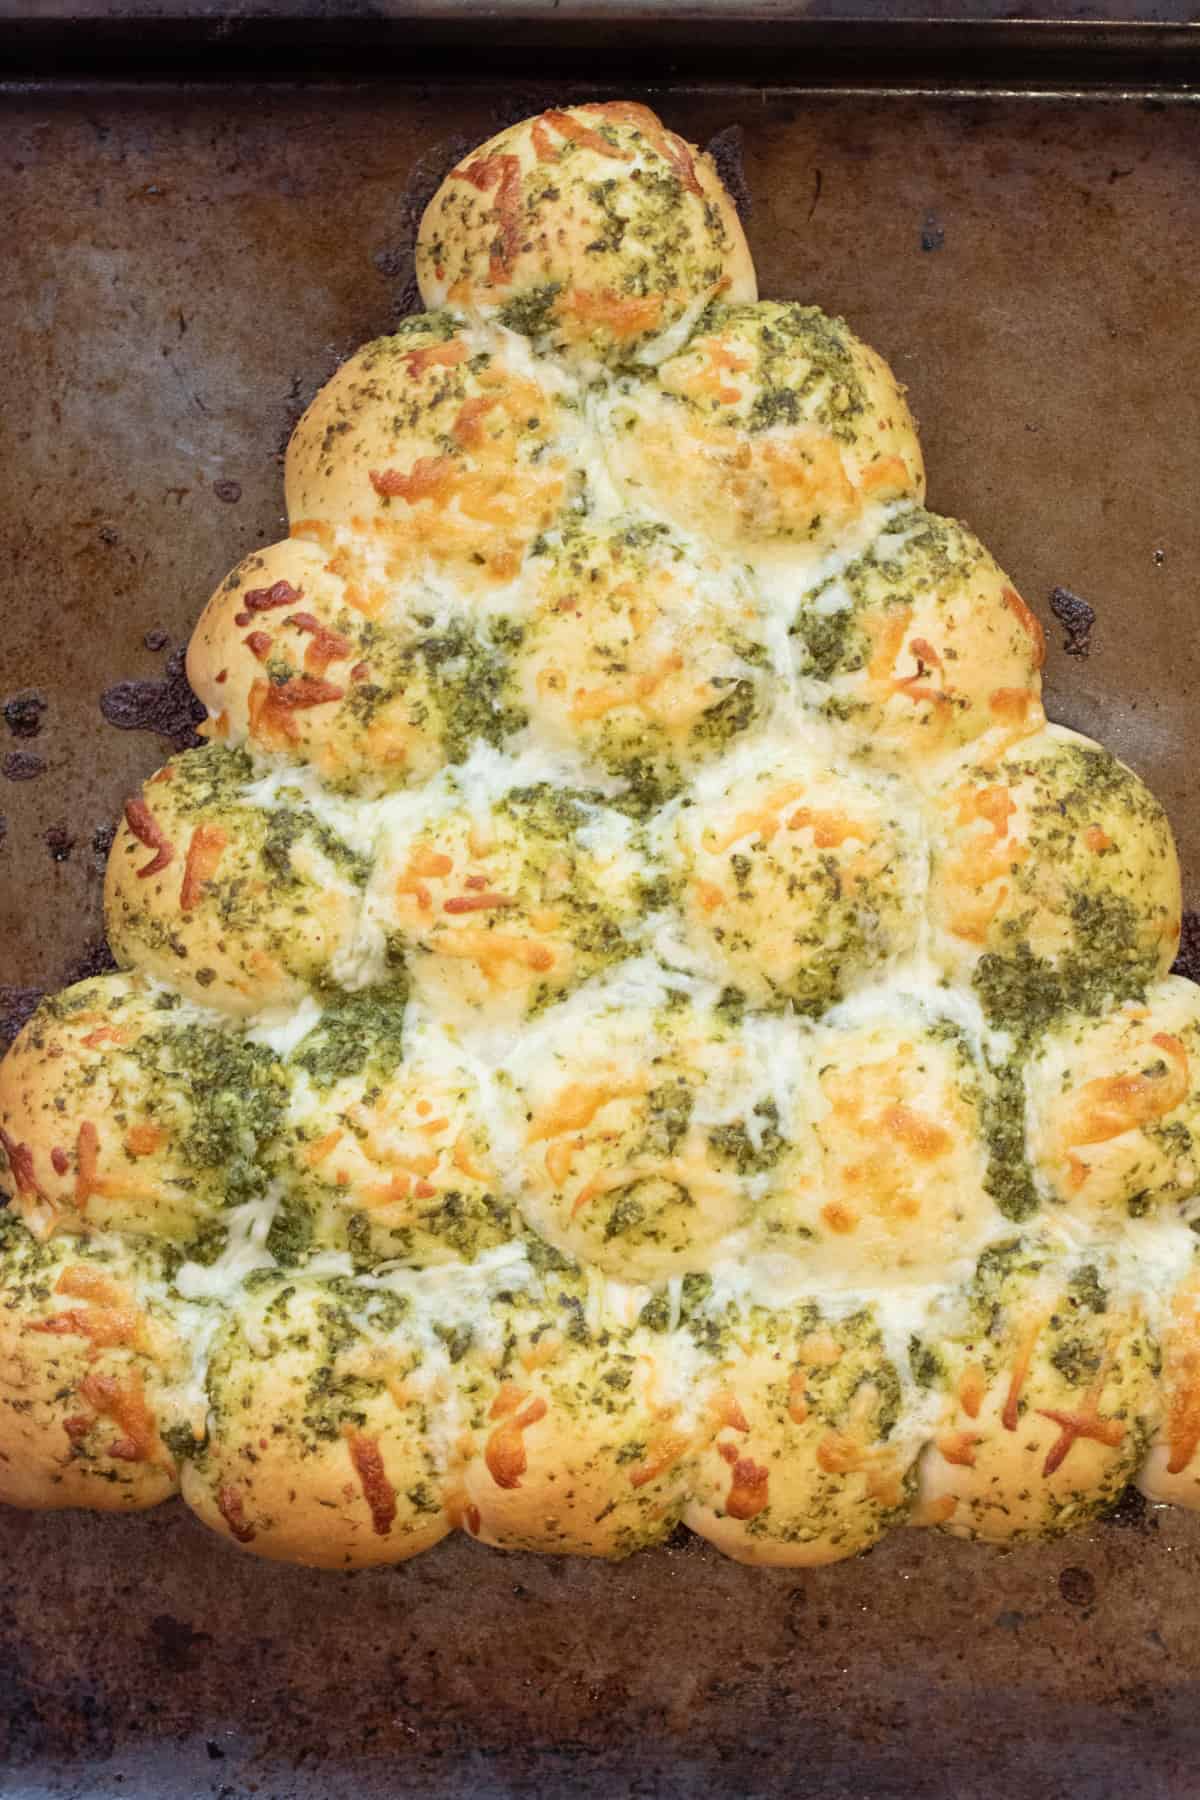 a baked Christmas tree shaped rolls with pesto and melted cheese.